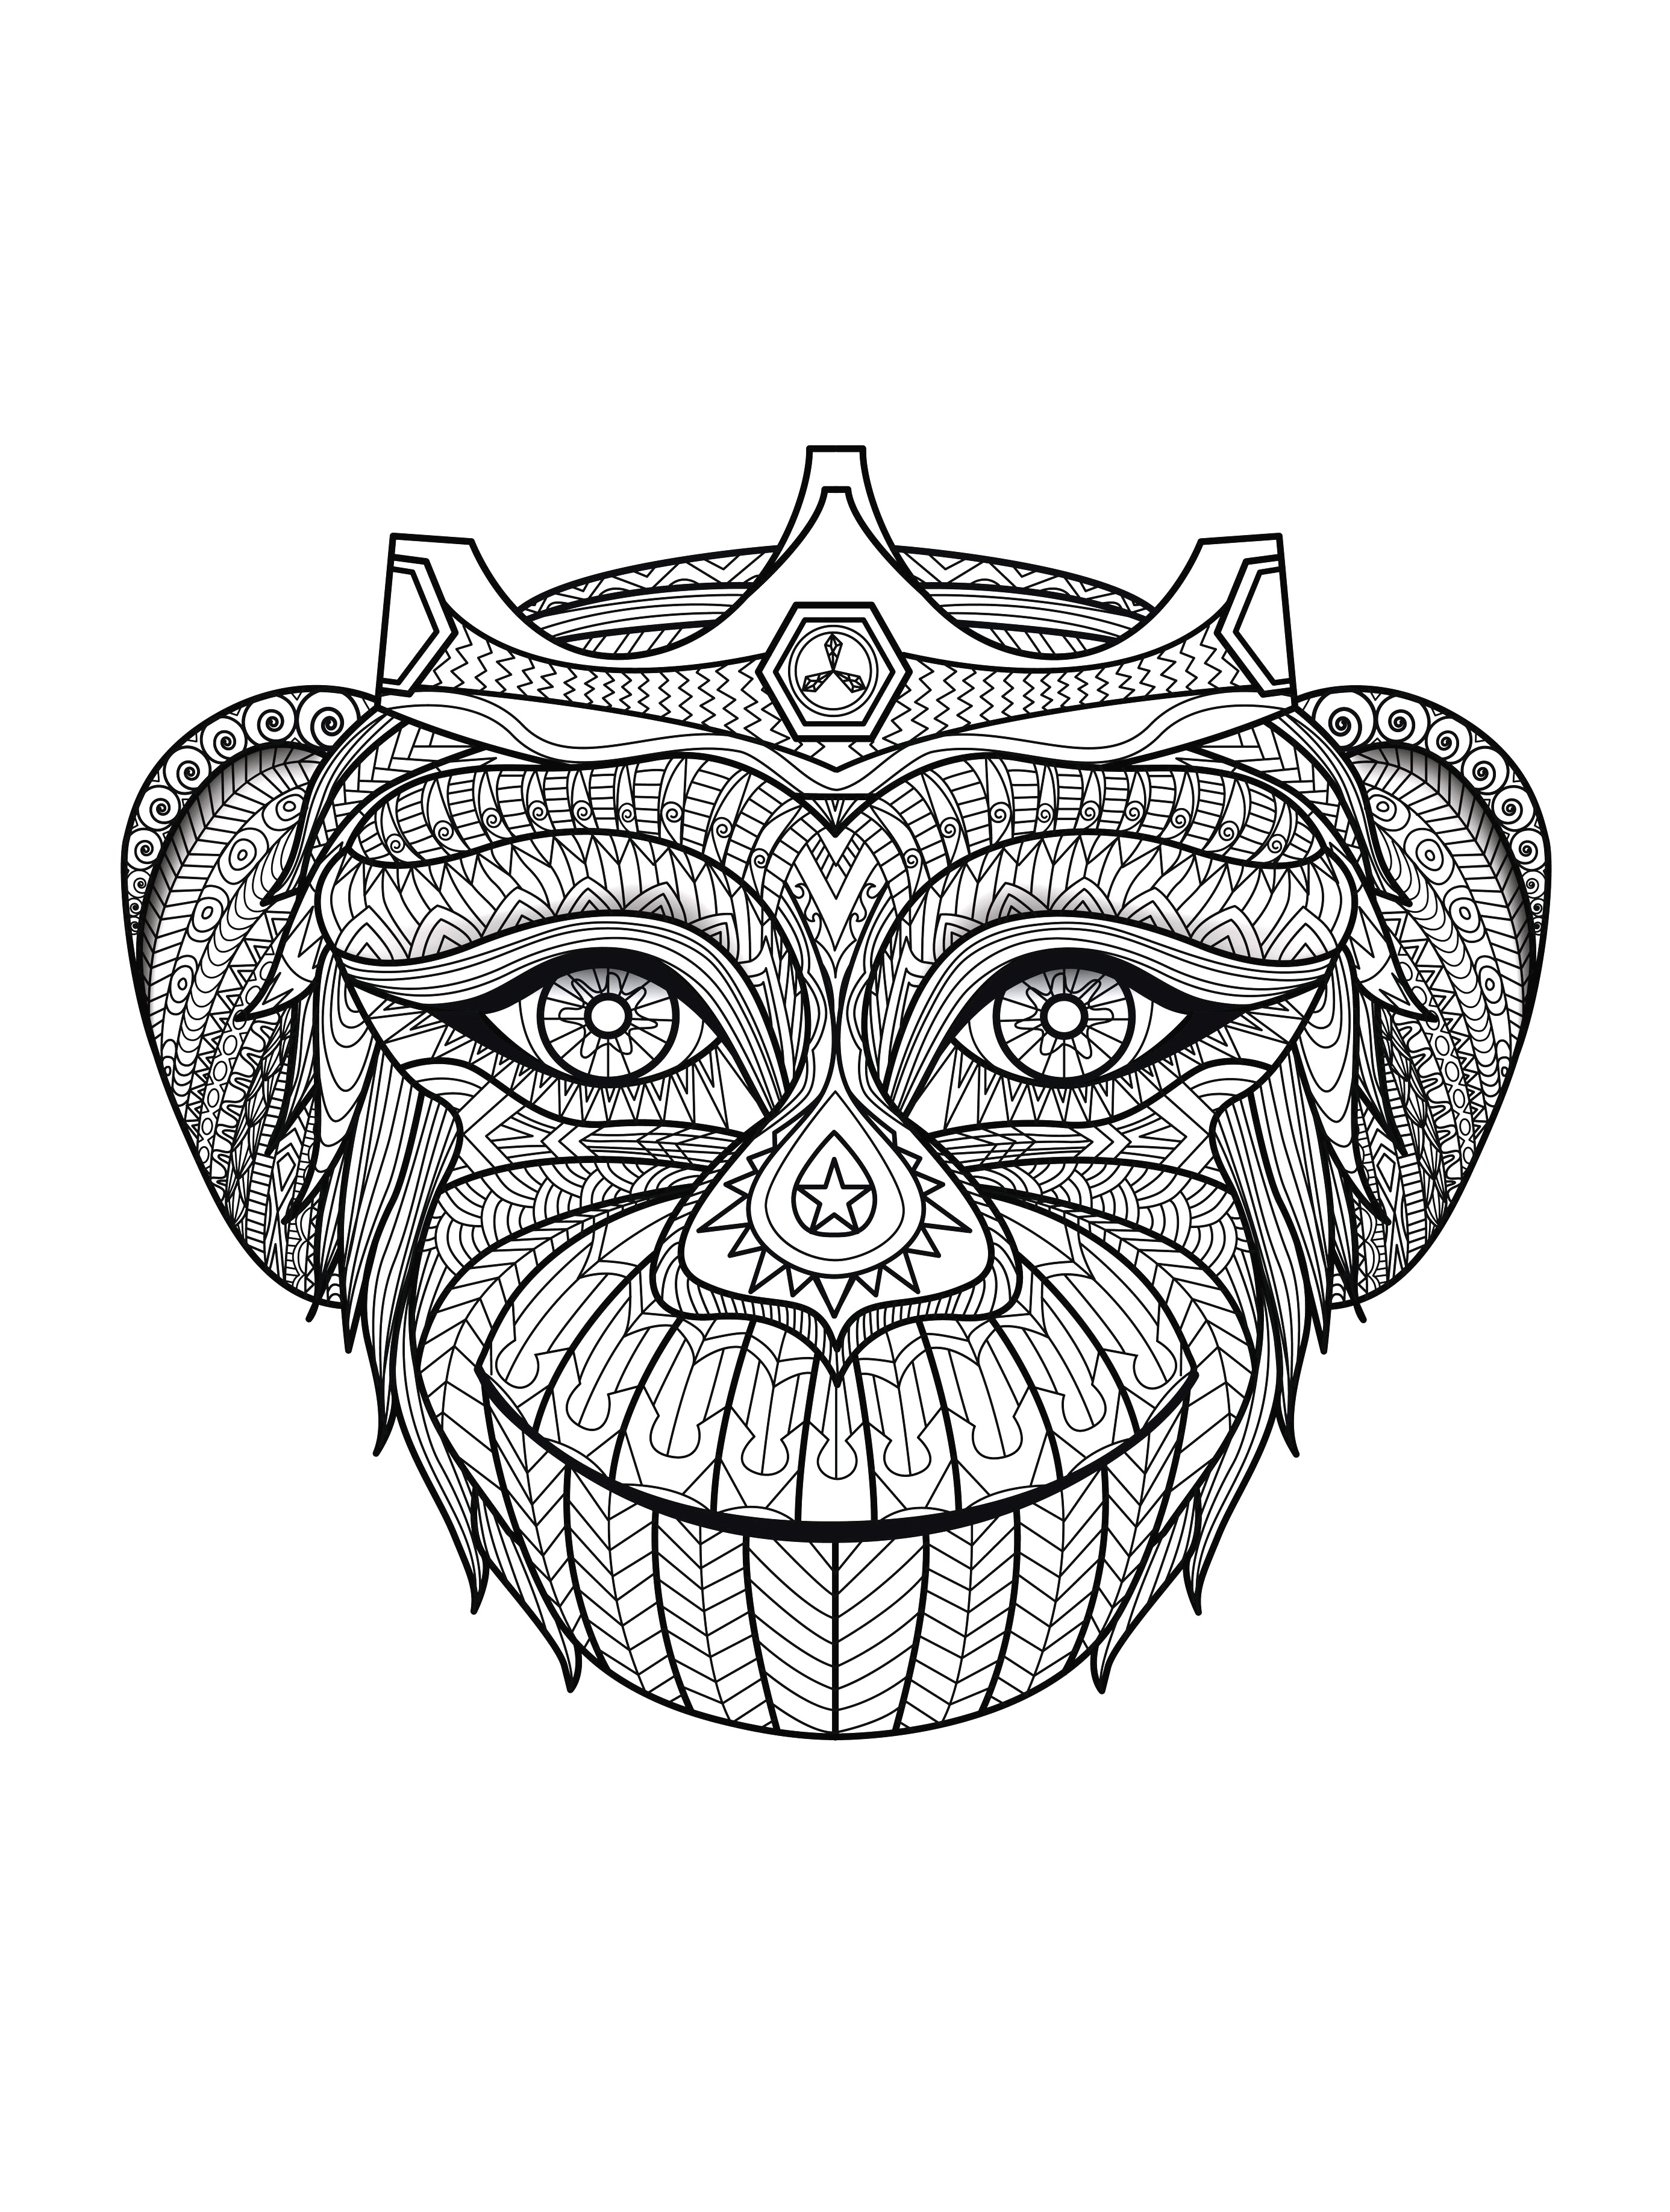 Download Africa monkey head - Africa Adult Coloring Pages